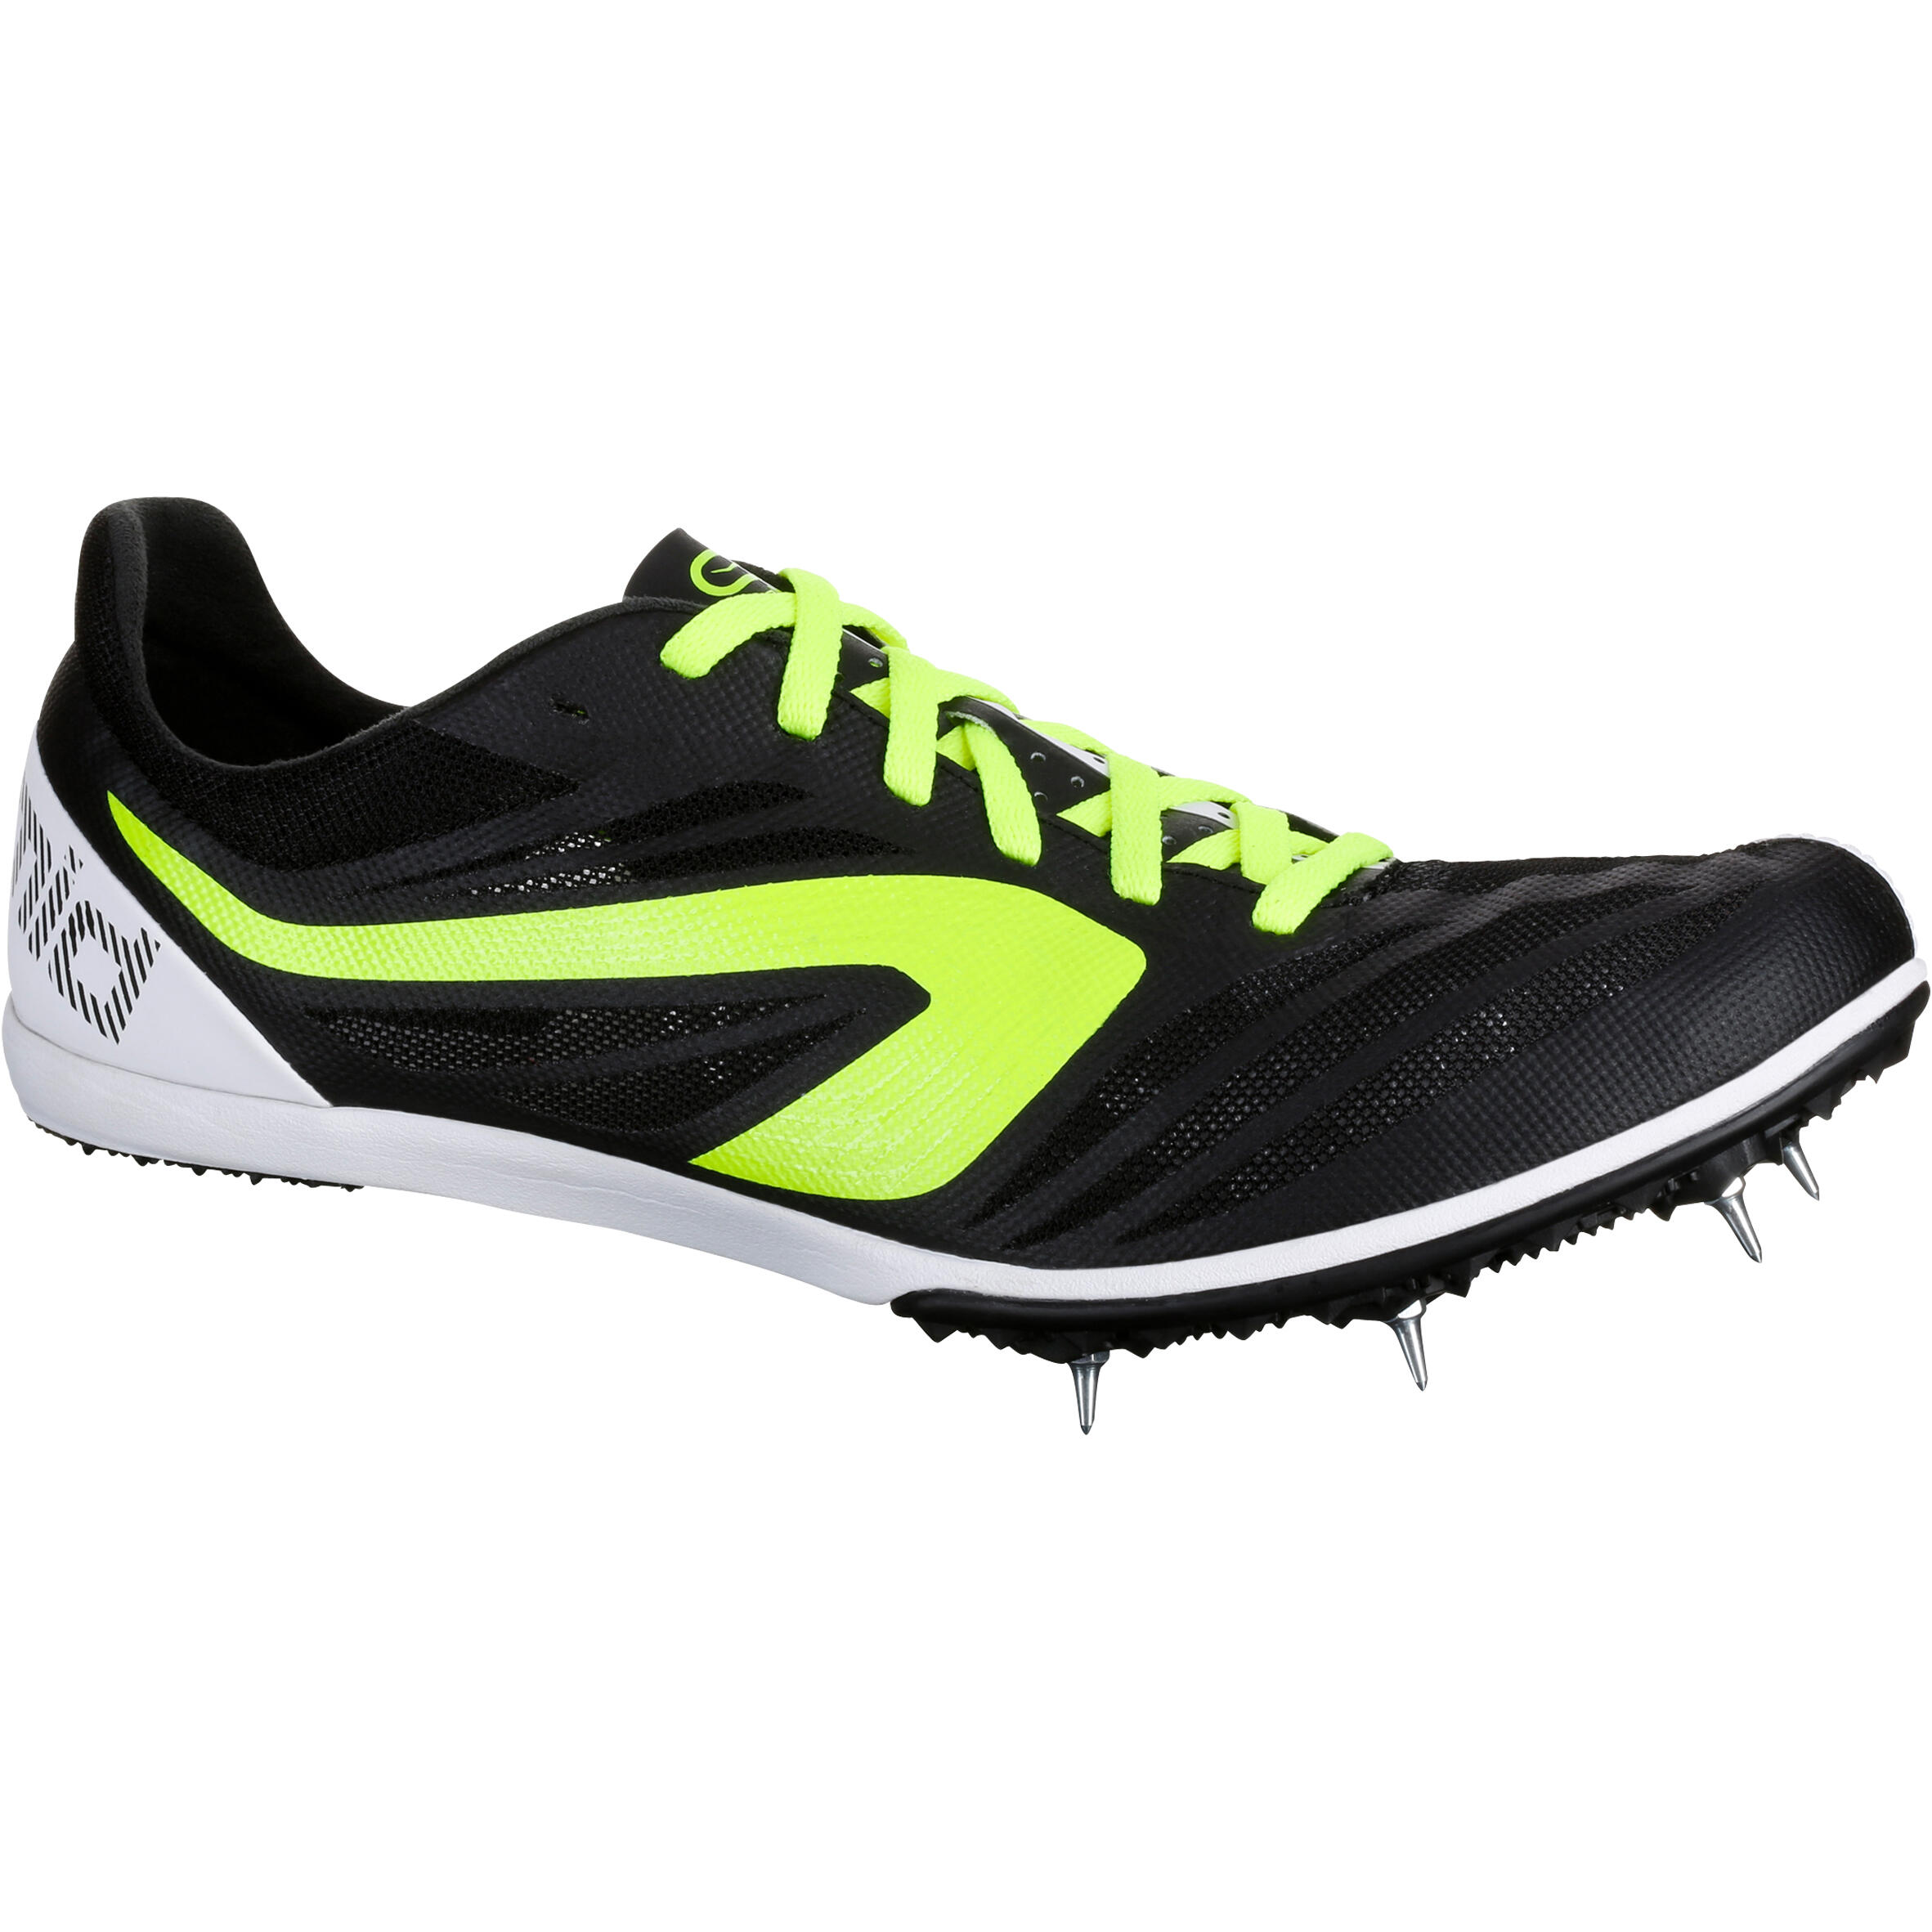 MIDDLE-DISTANCE RUNNING TRAINERS WITH 